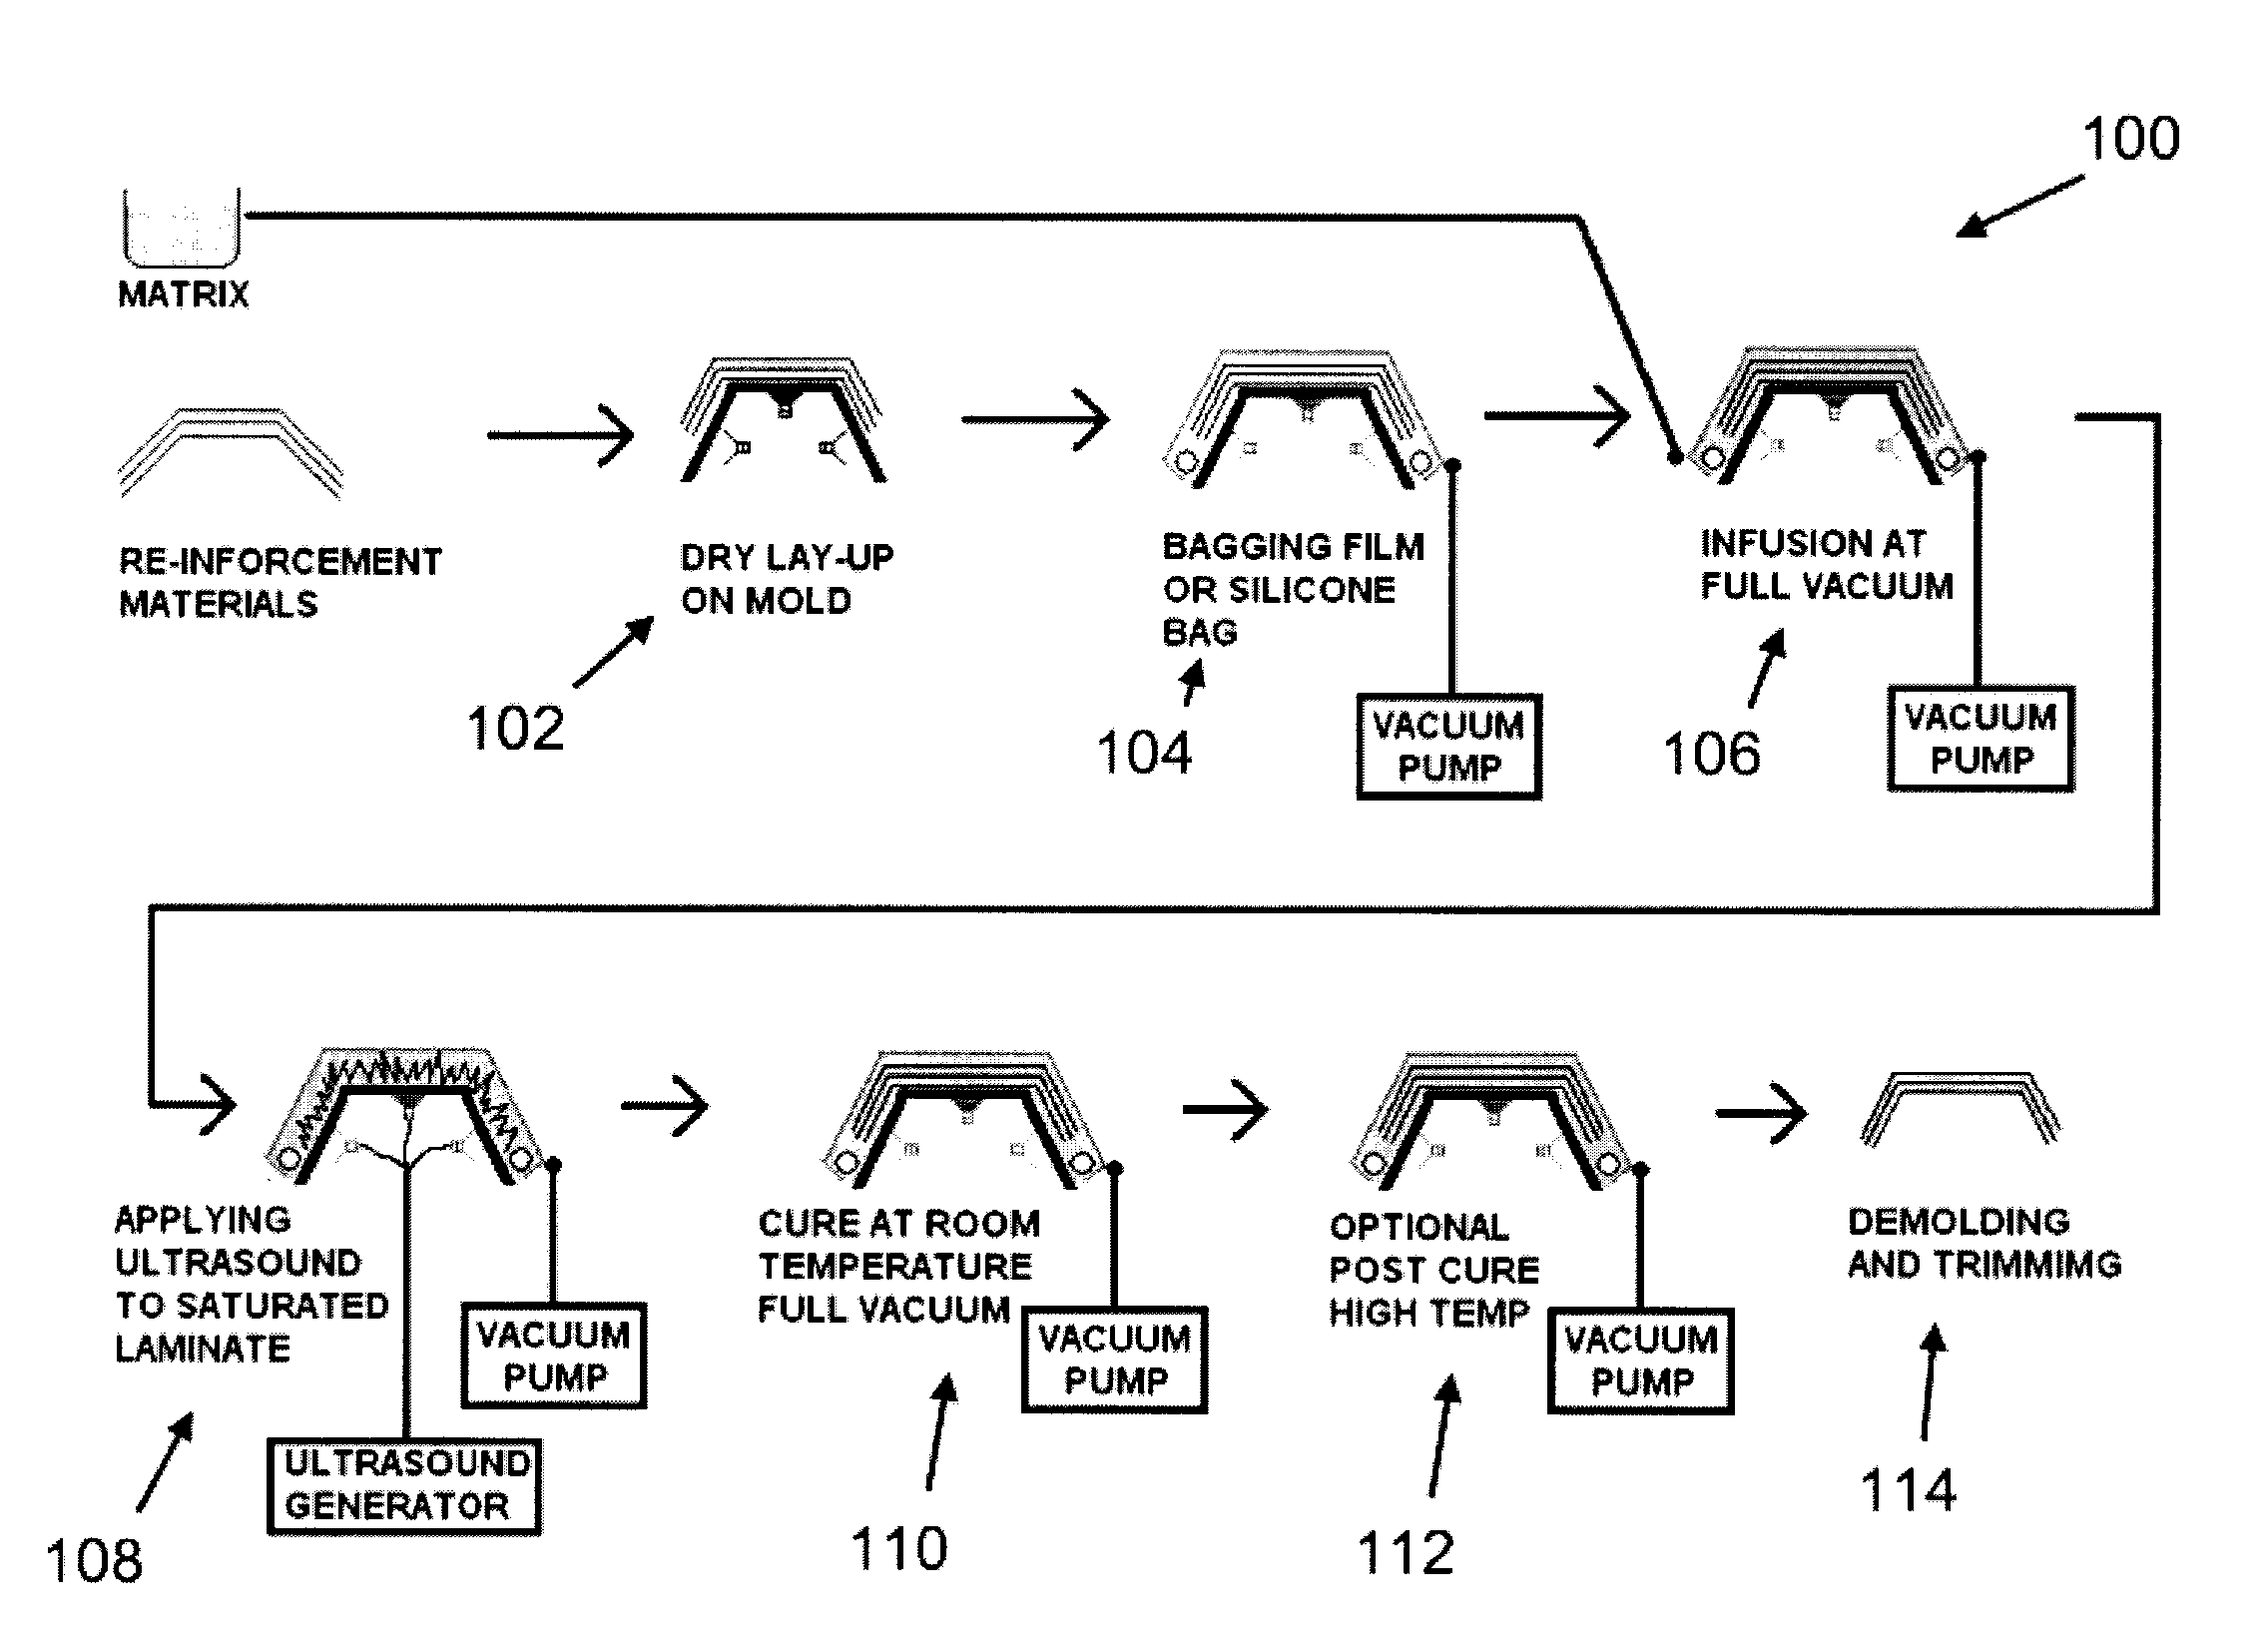 Process and Apparatus for Molding Composite Articles